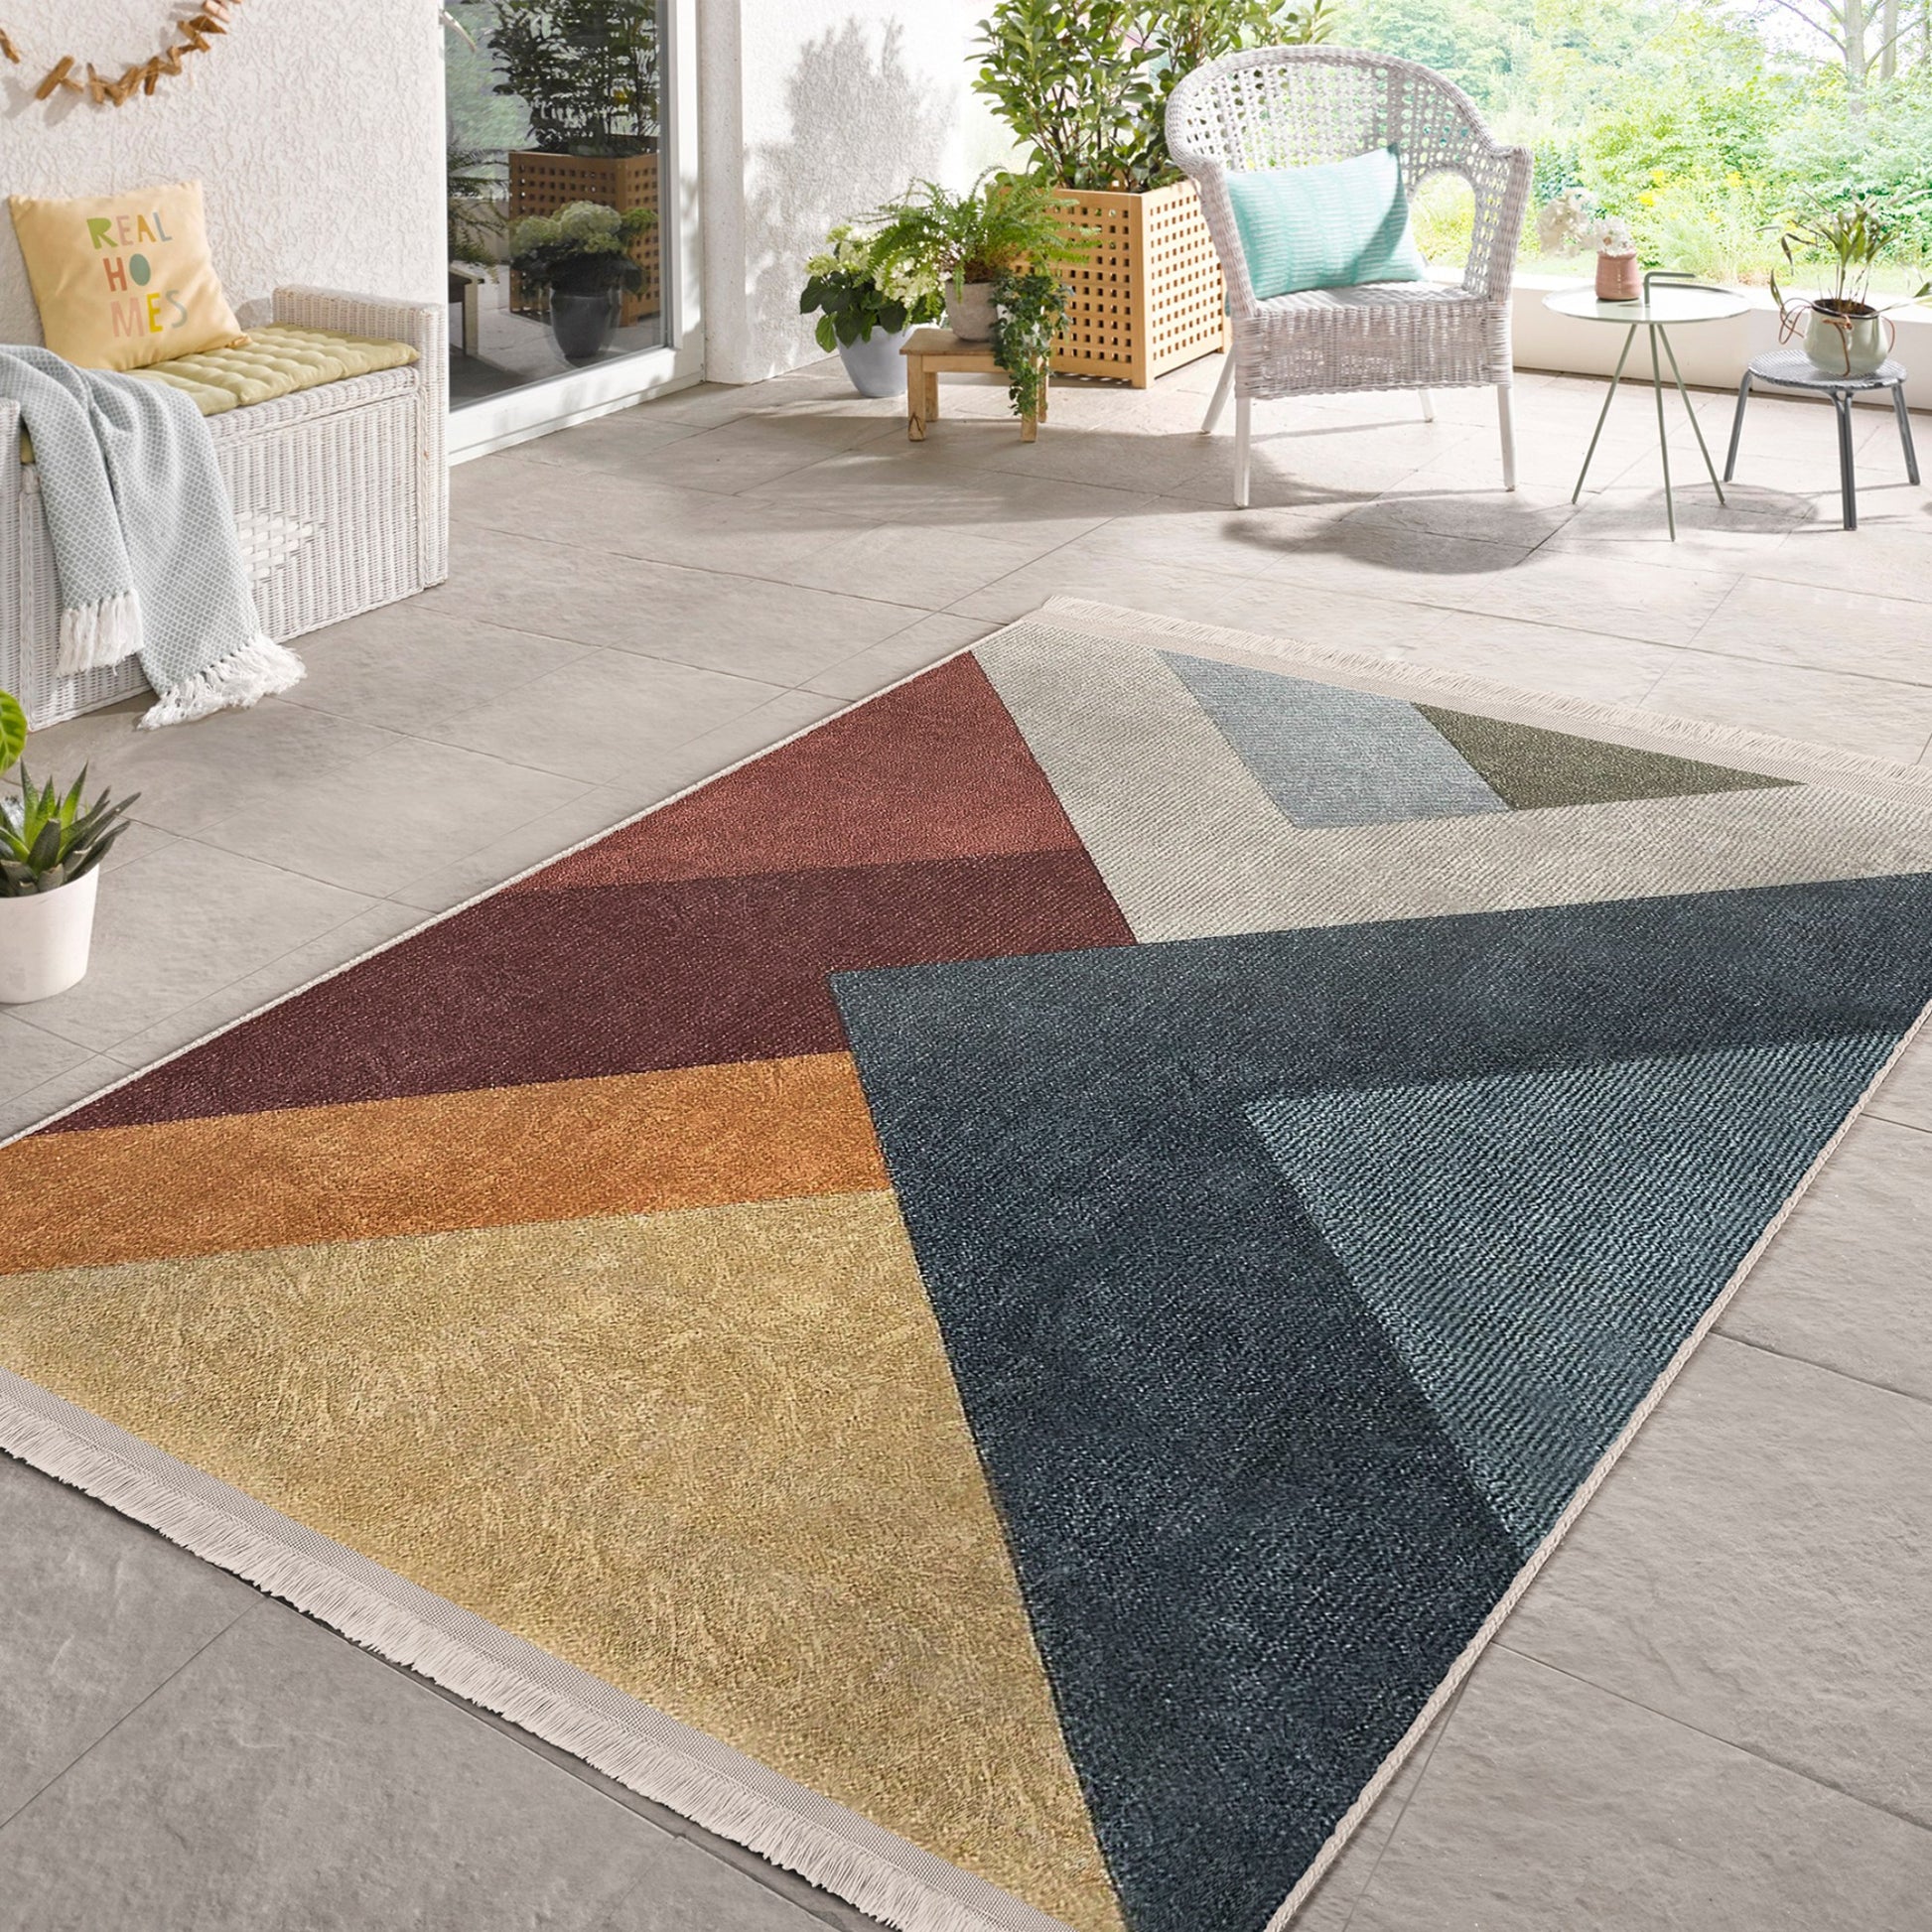 High-Quality Triangle Pattern Decorative Rug for Modern Decor